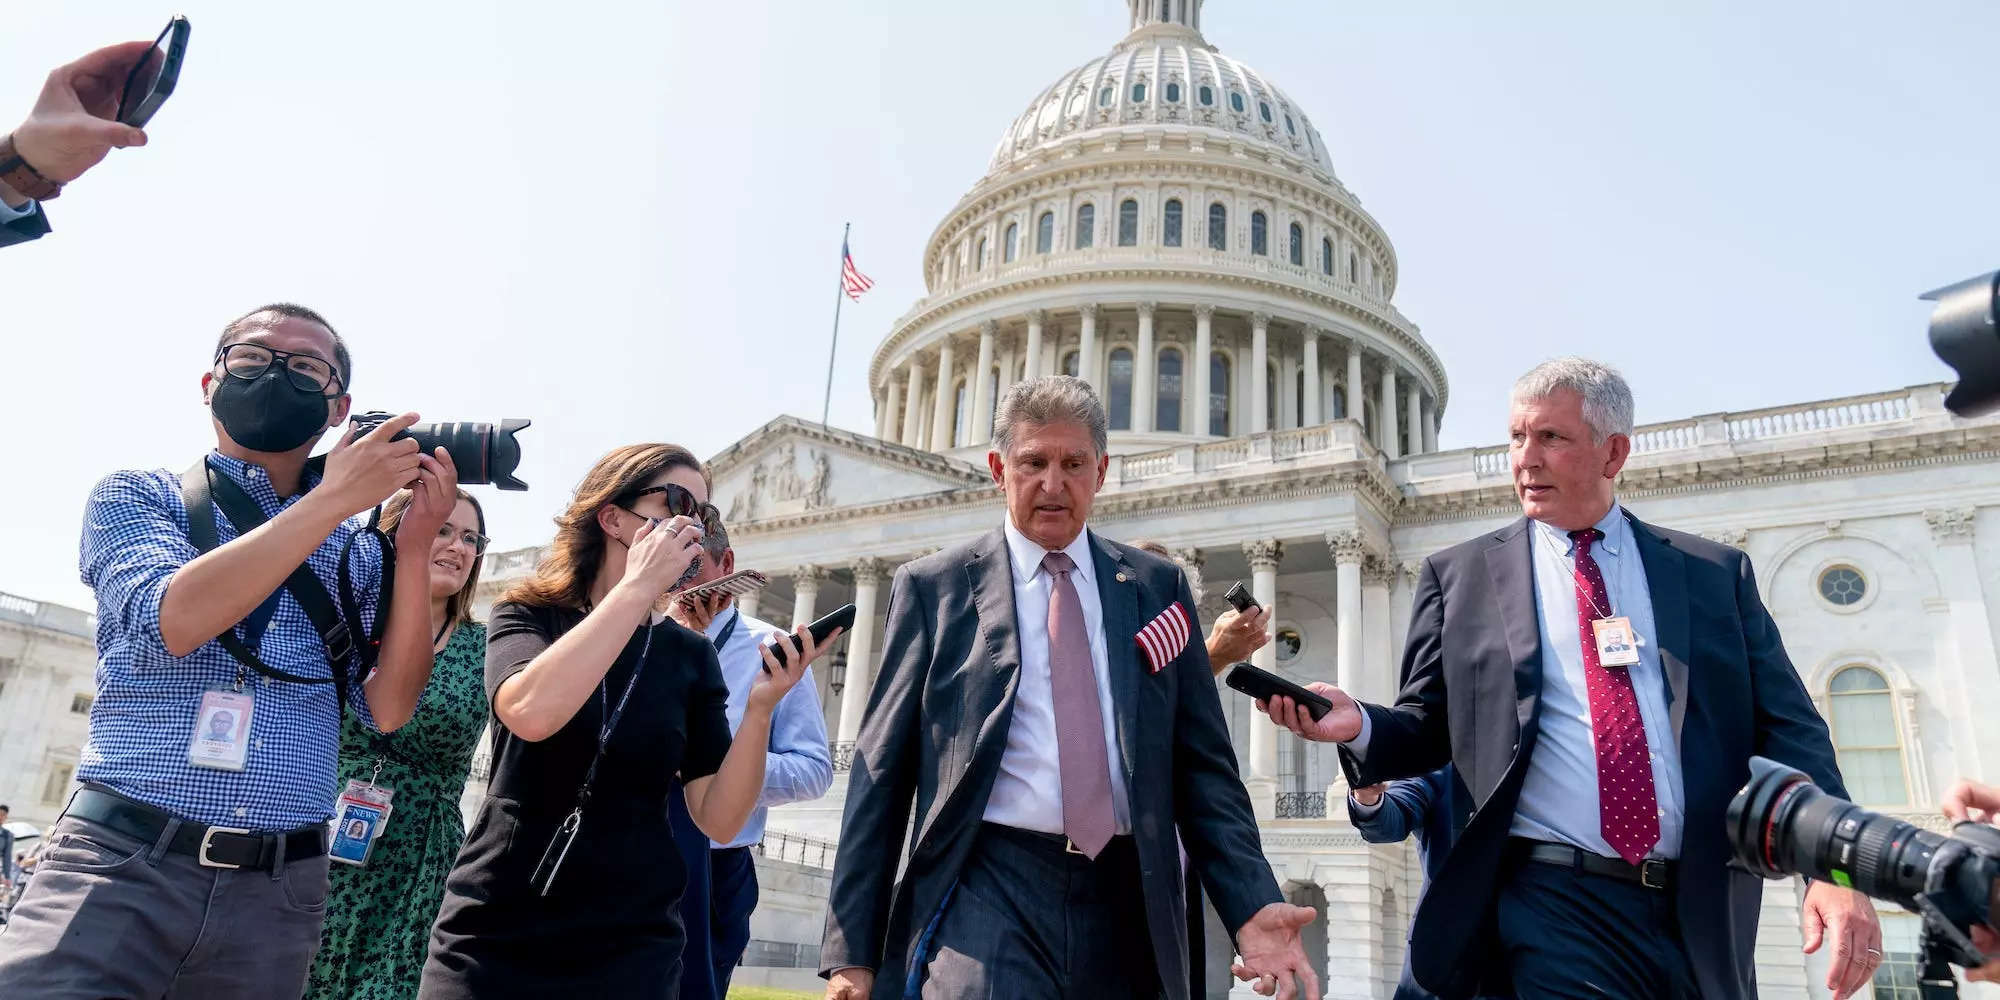 Sen. Joe Manchin, D-W.Va., speaks with reporters as he leaves a Congressional Remembrance Ceremony marking the 20th anniversary of the Sept. 11, 2001, terrorist attacks, on Capitol Hill in Washington, Monday, Sept. 13, 2021